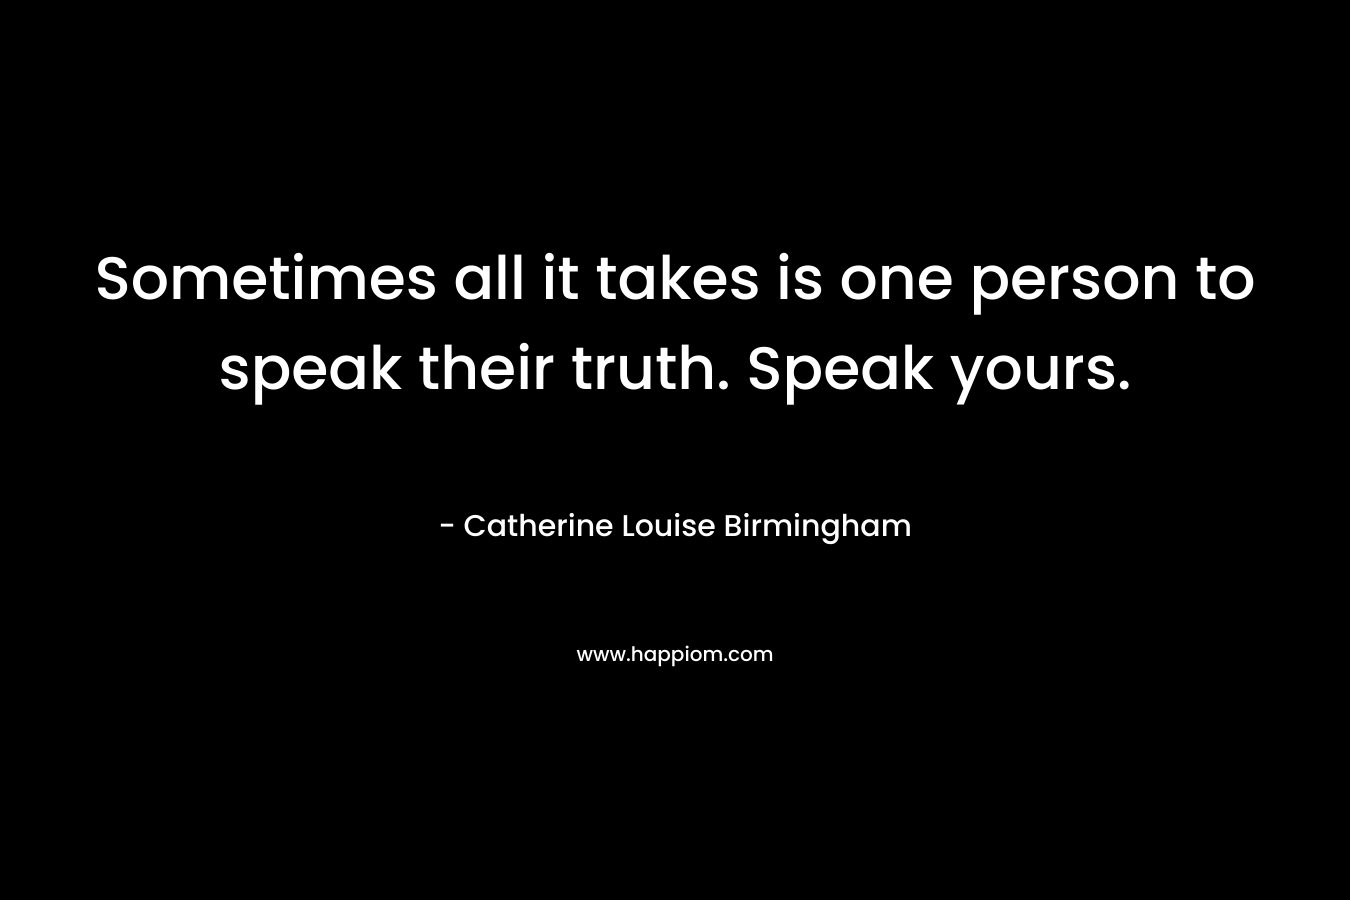 Sometimes all it takes is one person to speak their truth. Speak yours.